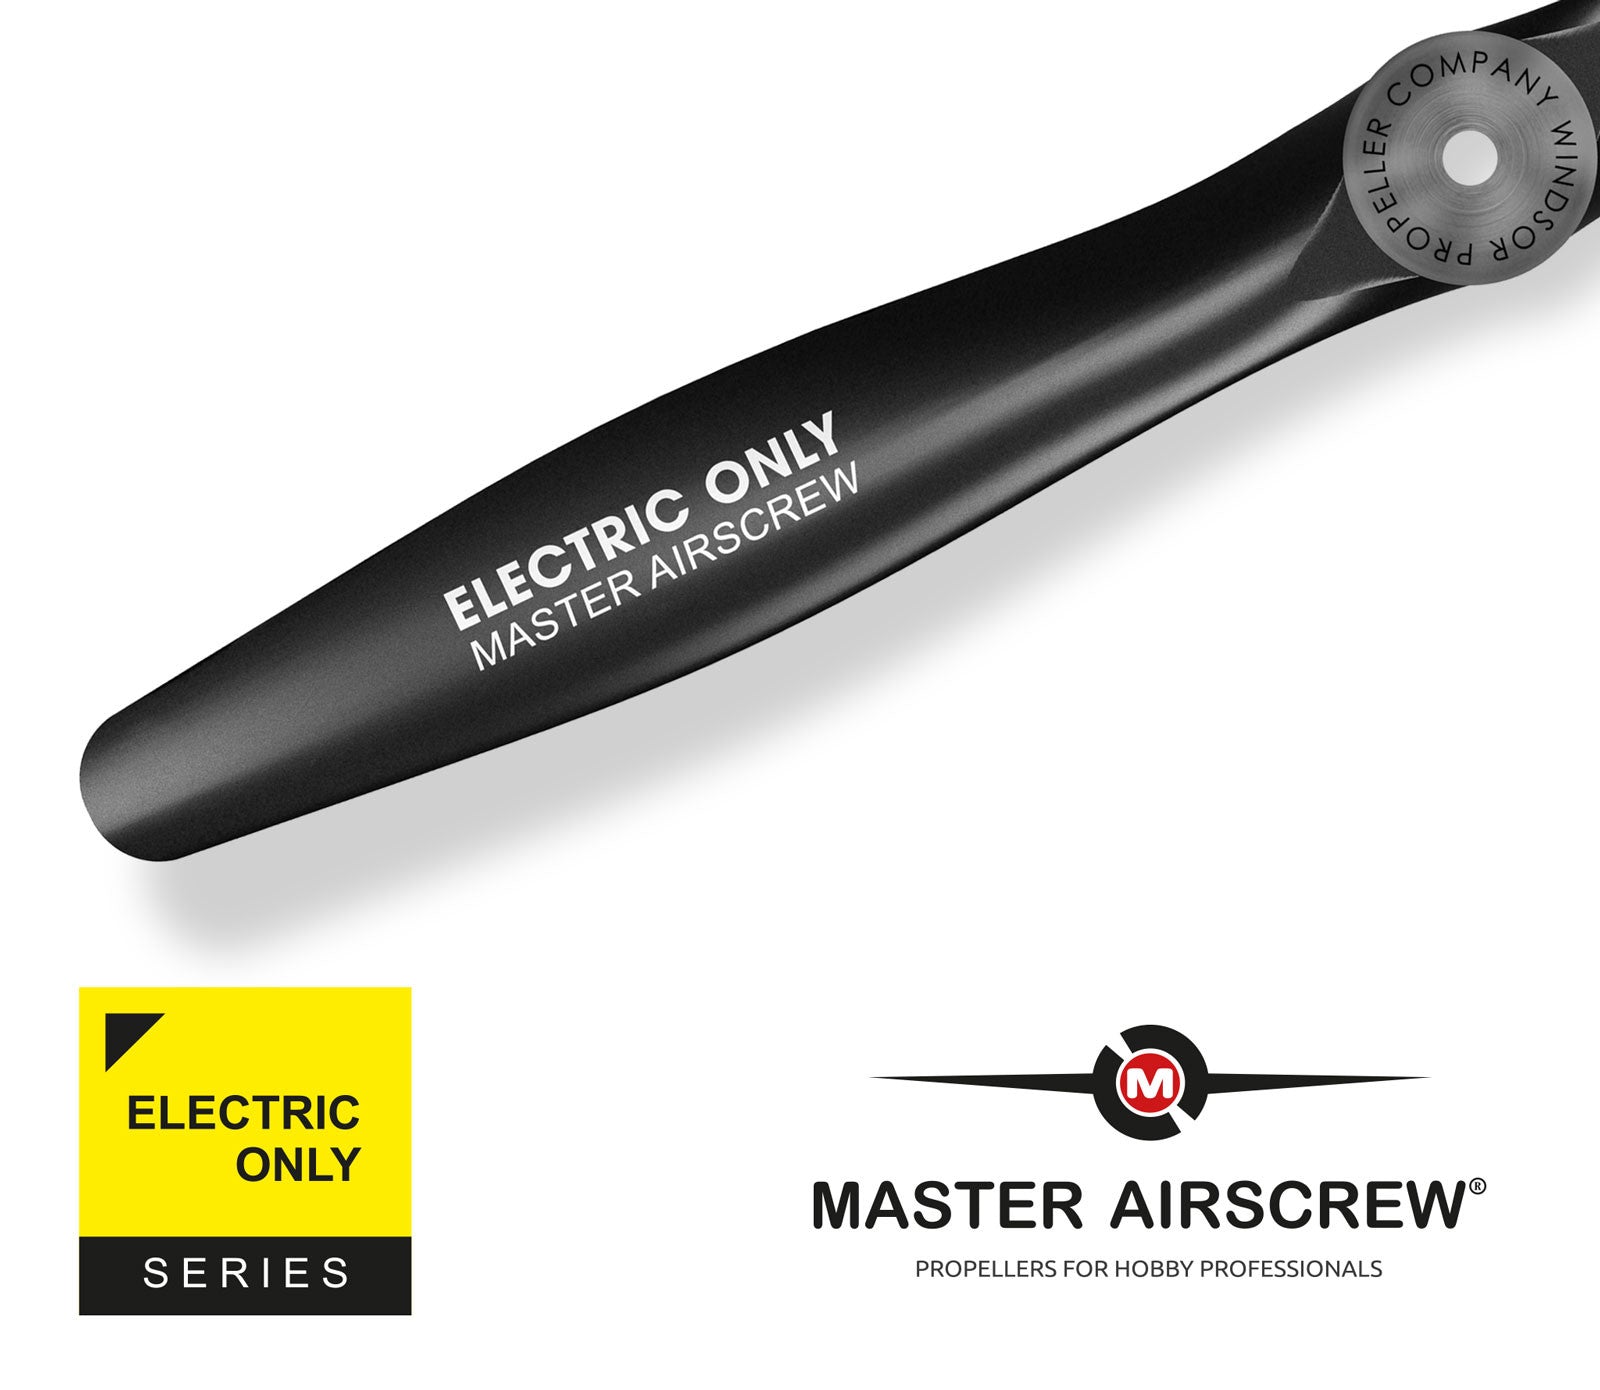 Electric Only - 10x6 Propeller - Master Airscrew